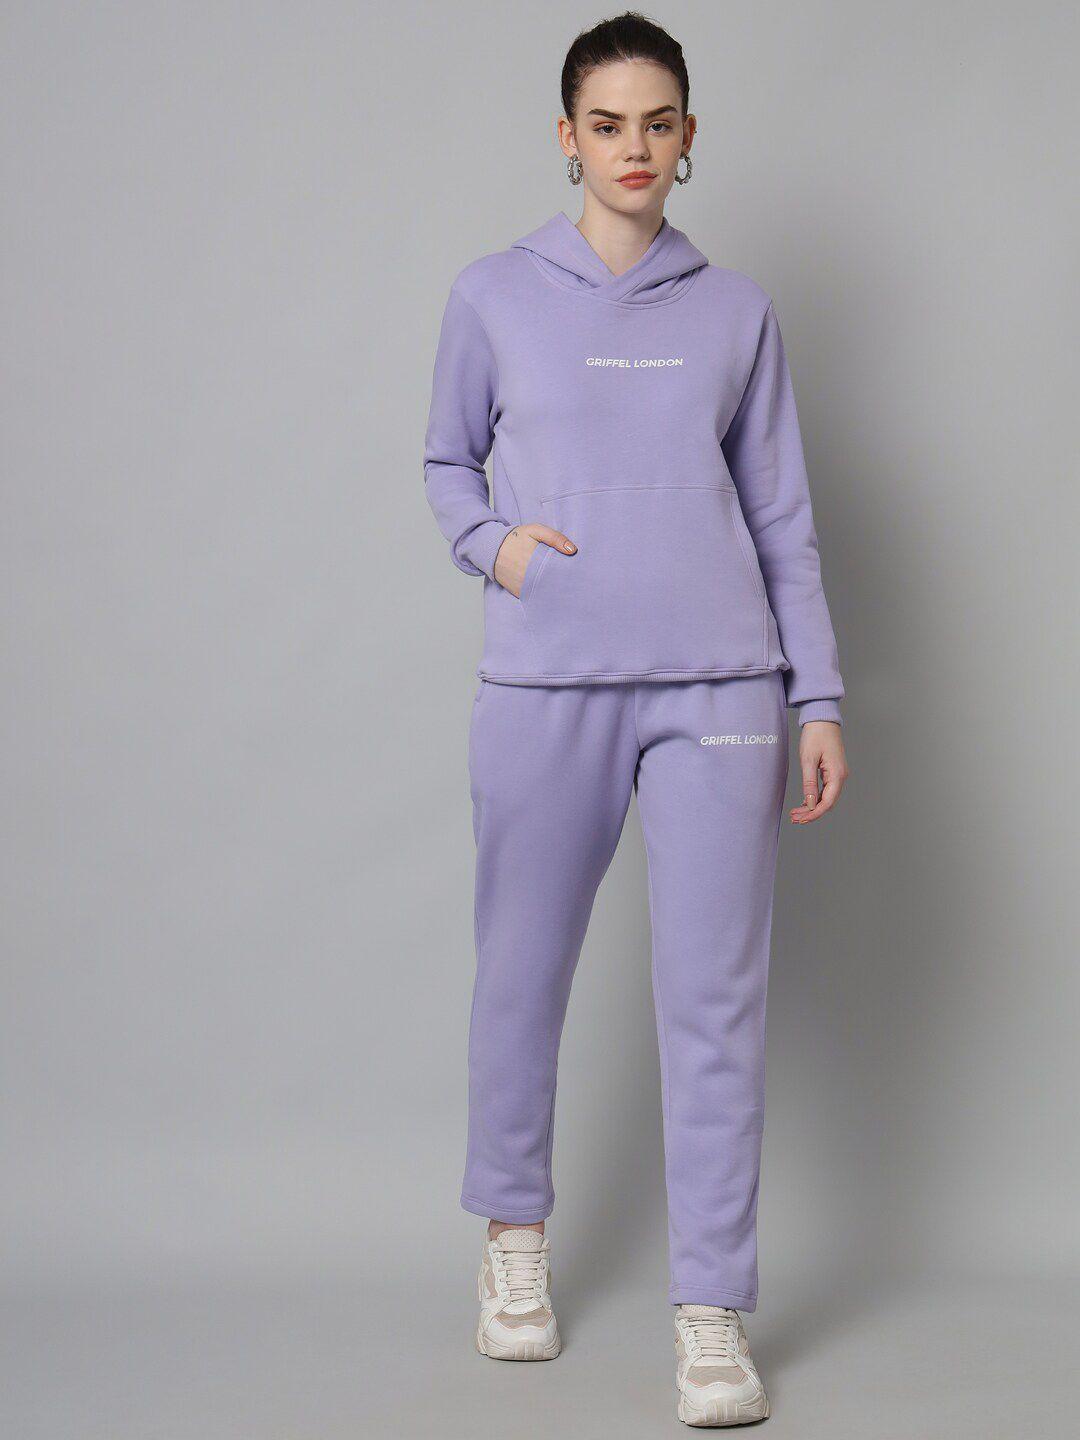 griffel printed women tracksuits